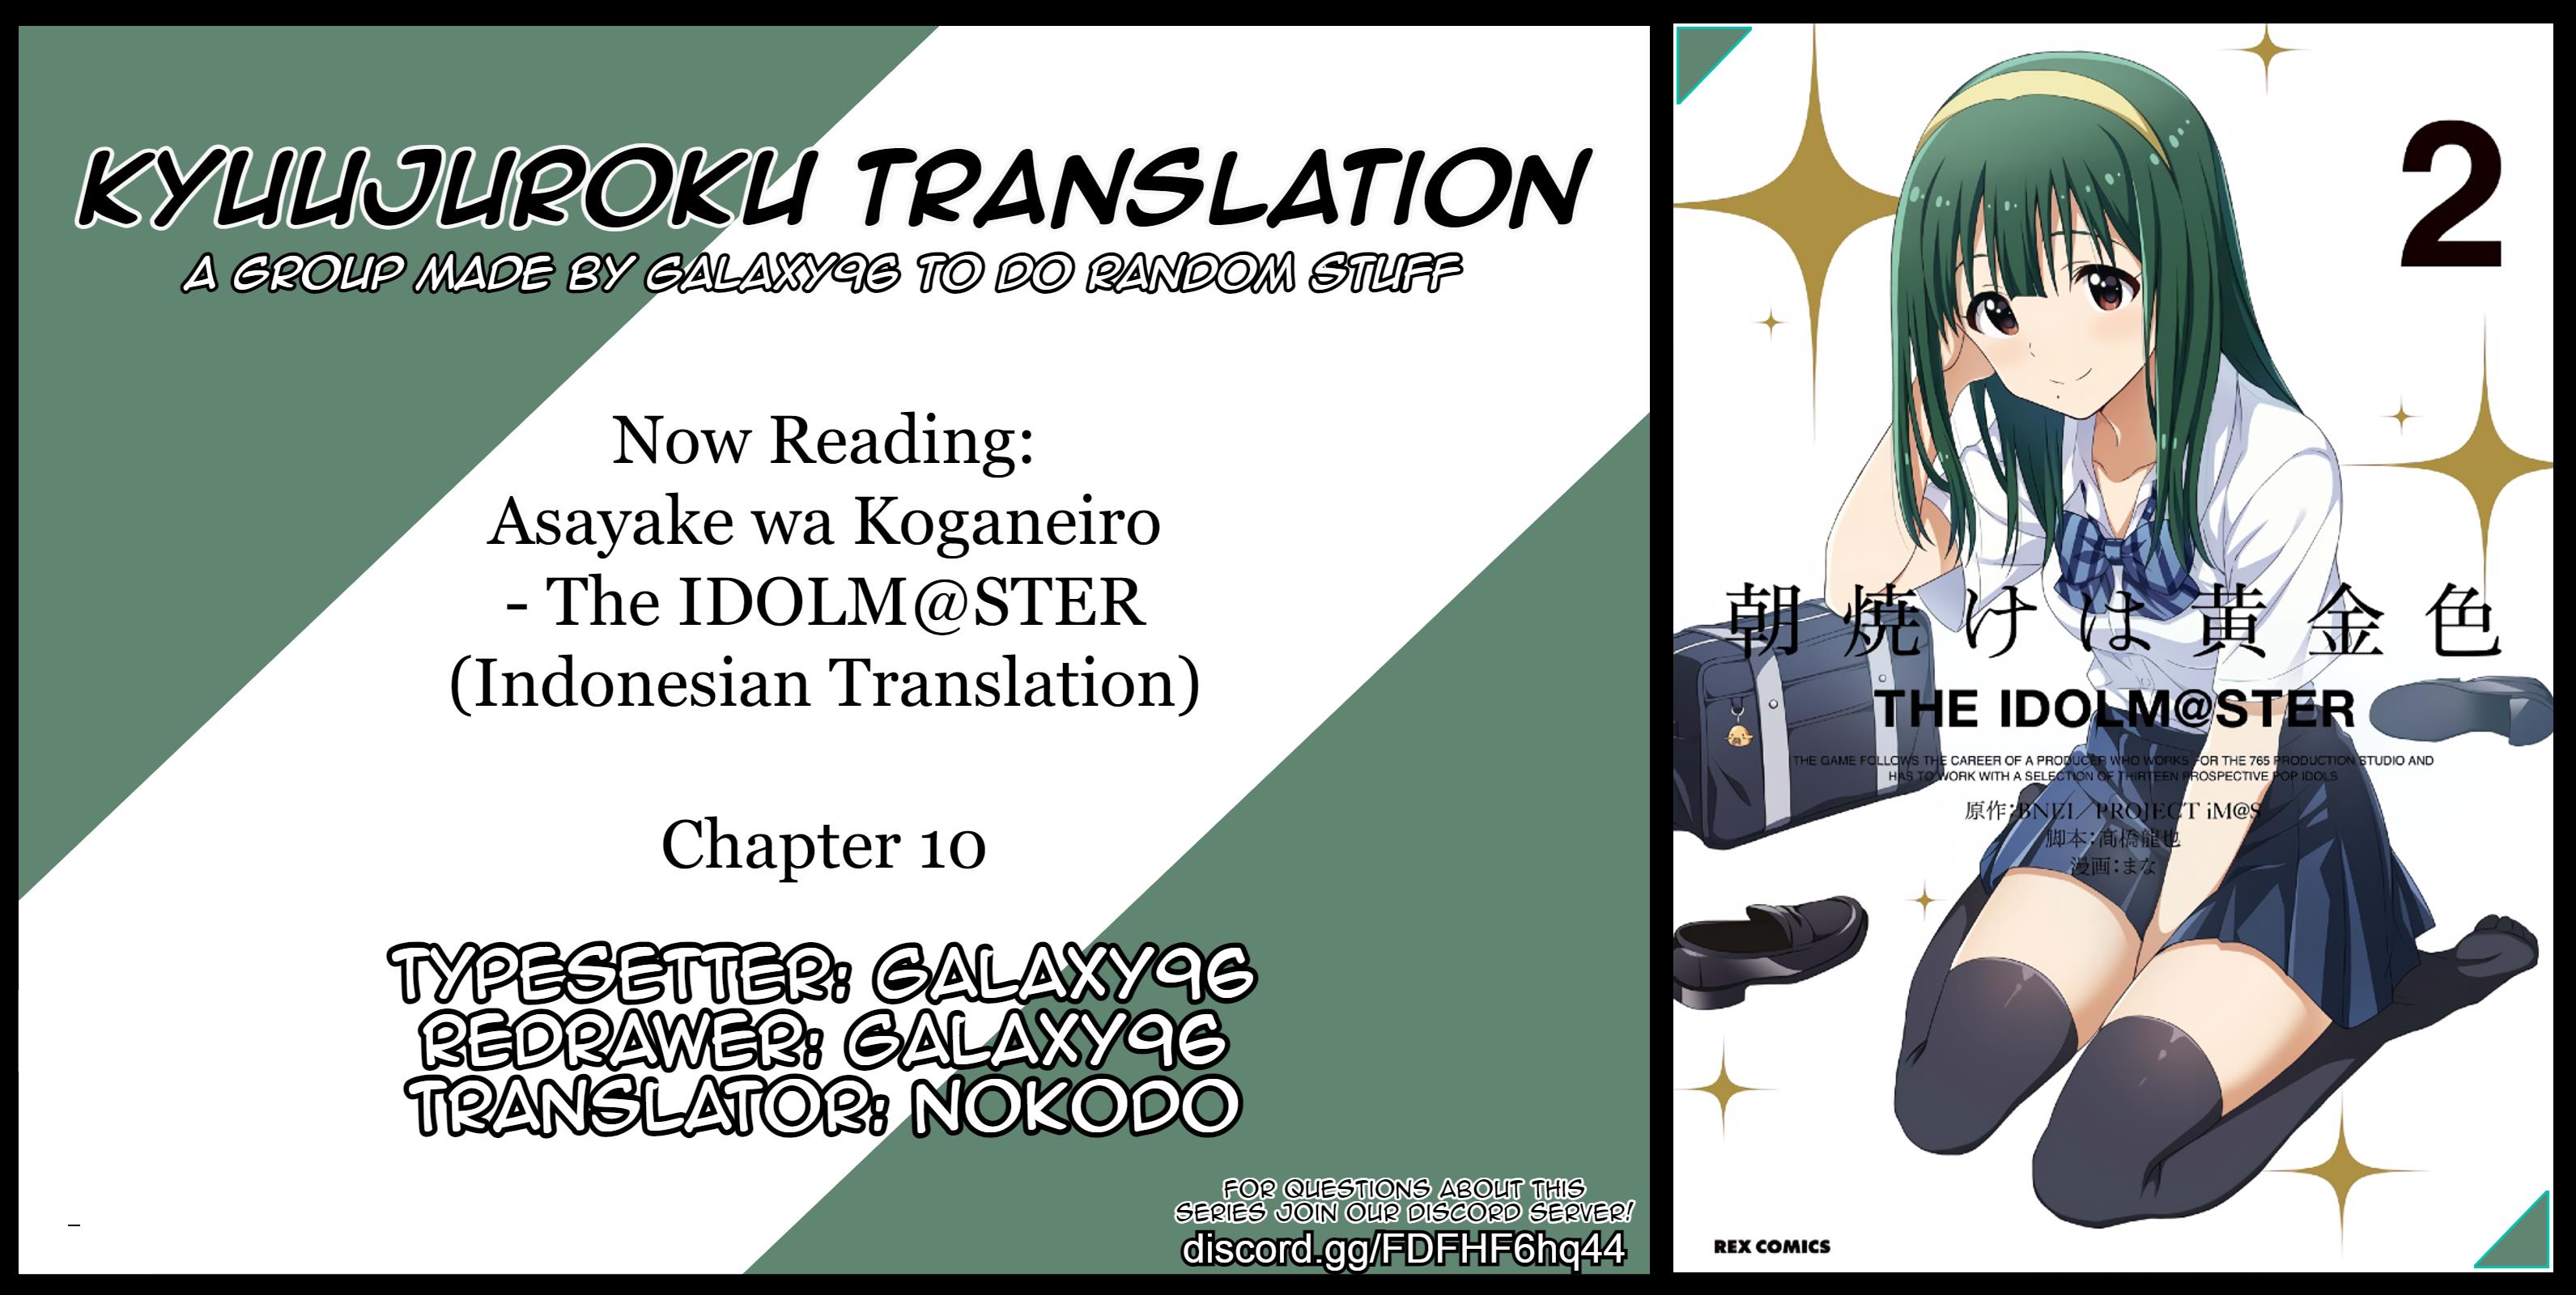 Morning Glow is Golden: The IDOLM@STER Chapter 10